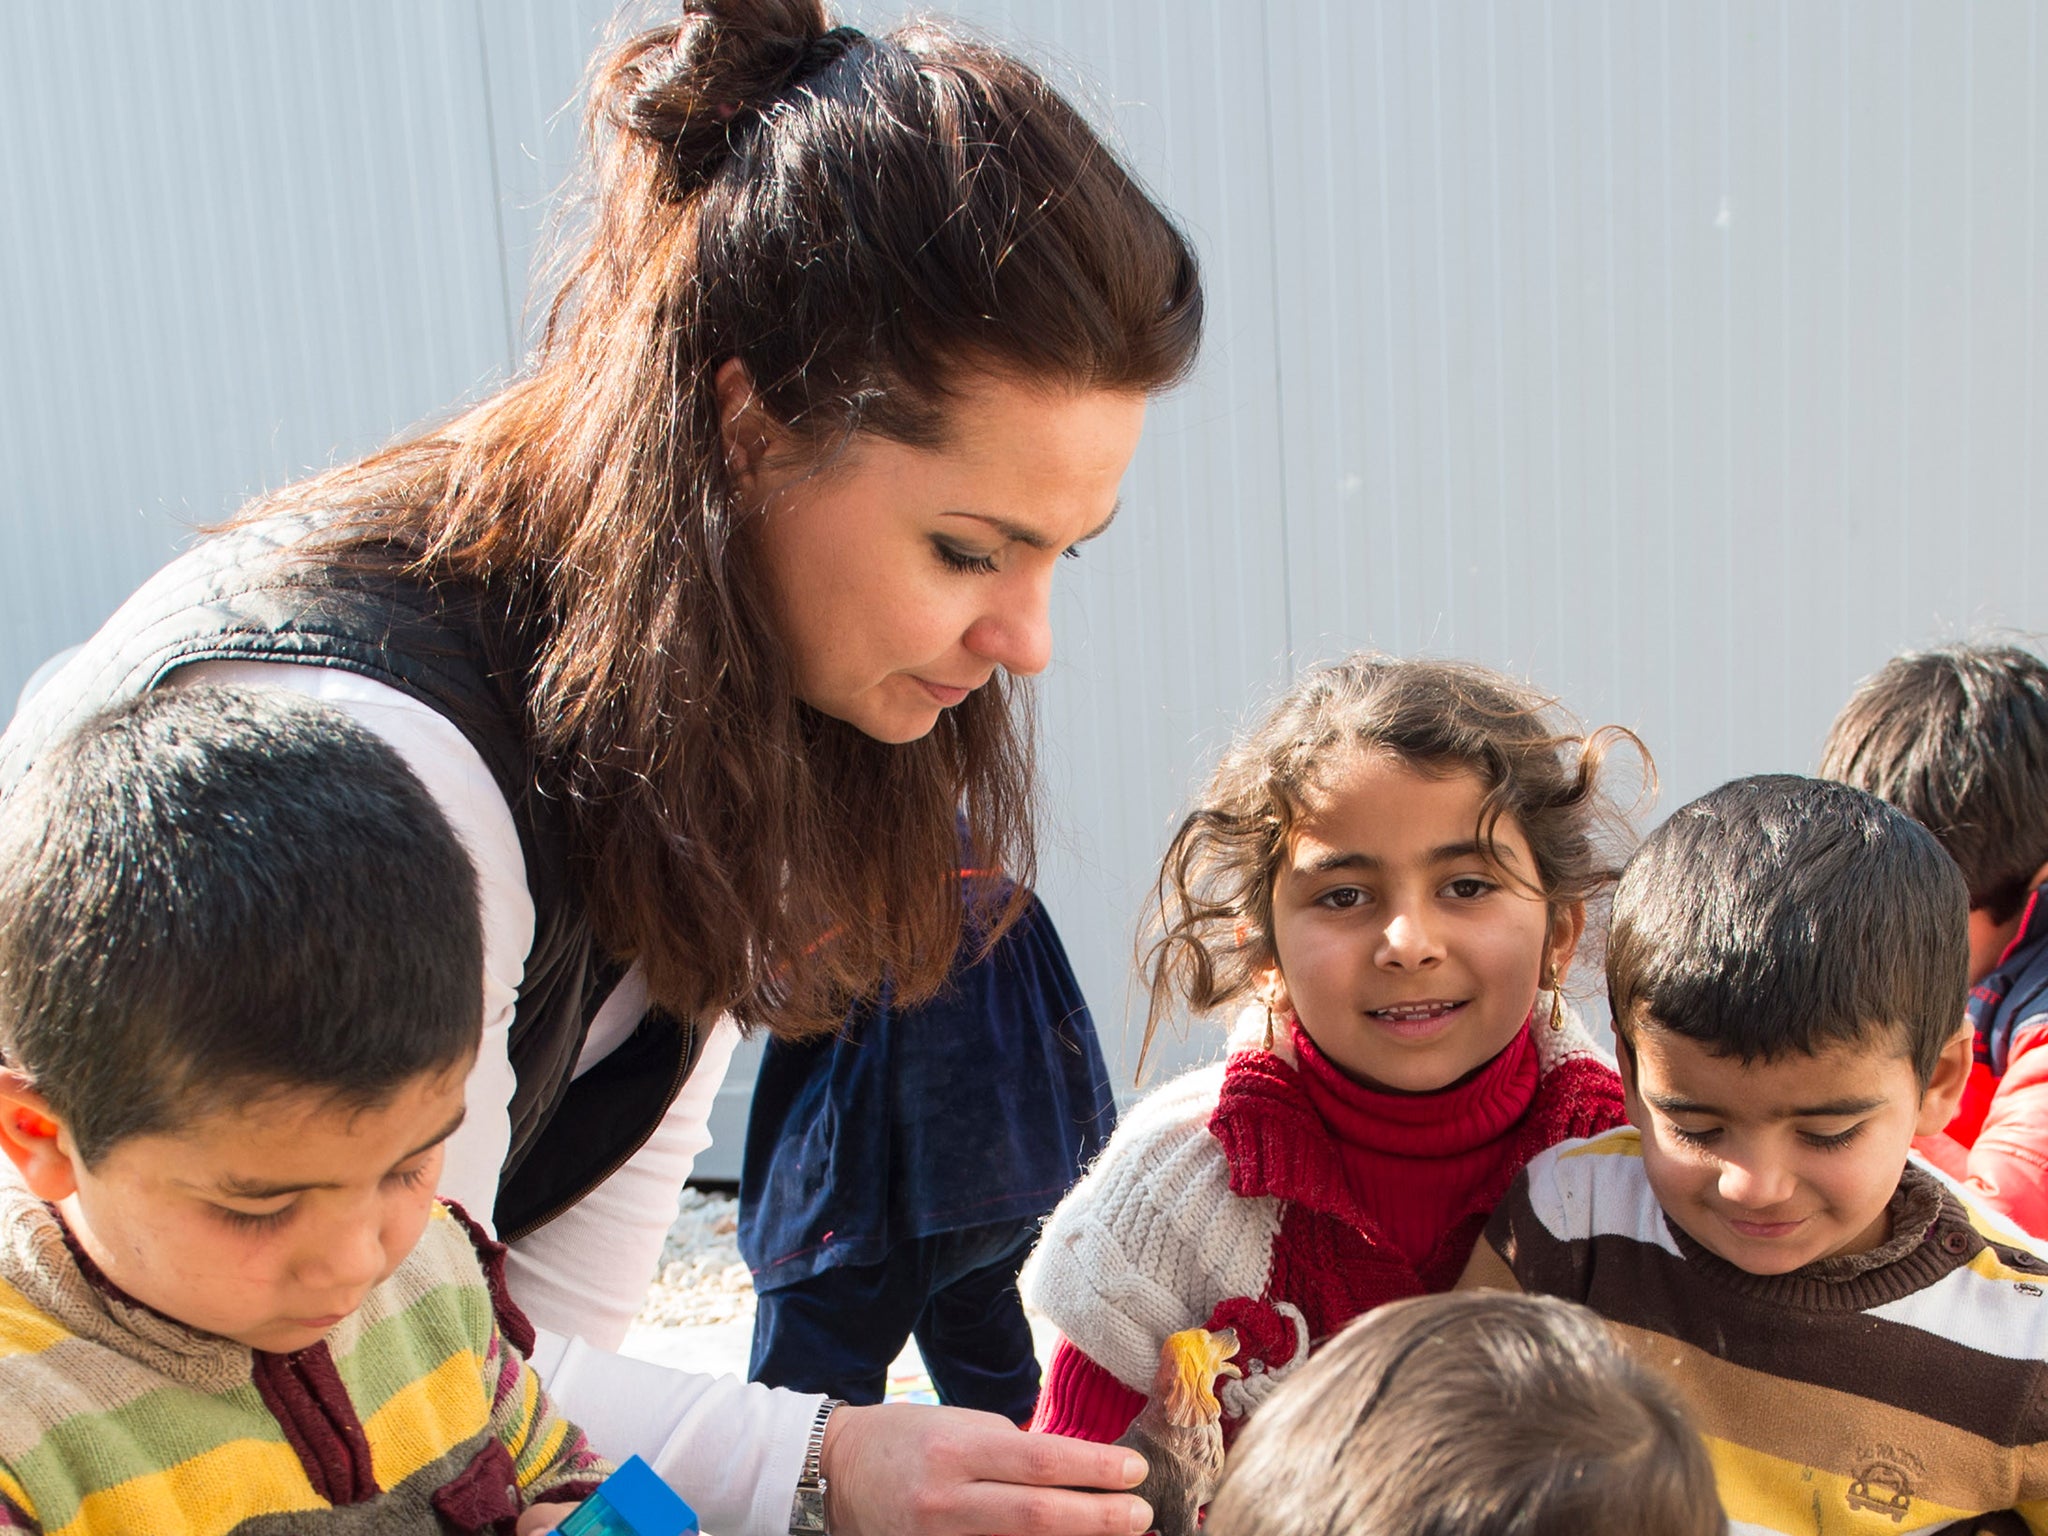 Conservative MP Heidi Allen plays with Syrian refugees during a visit to Lesbos, Greece (Matt Crossick/Save The Children)